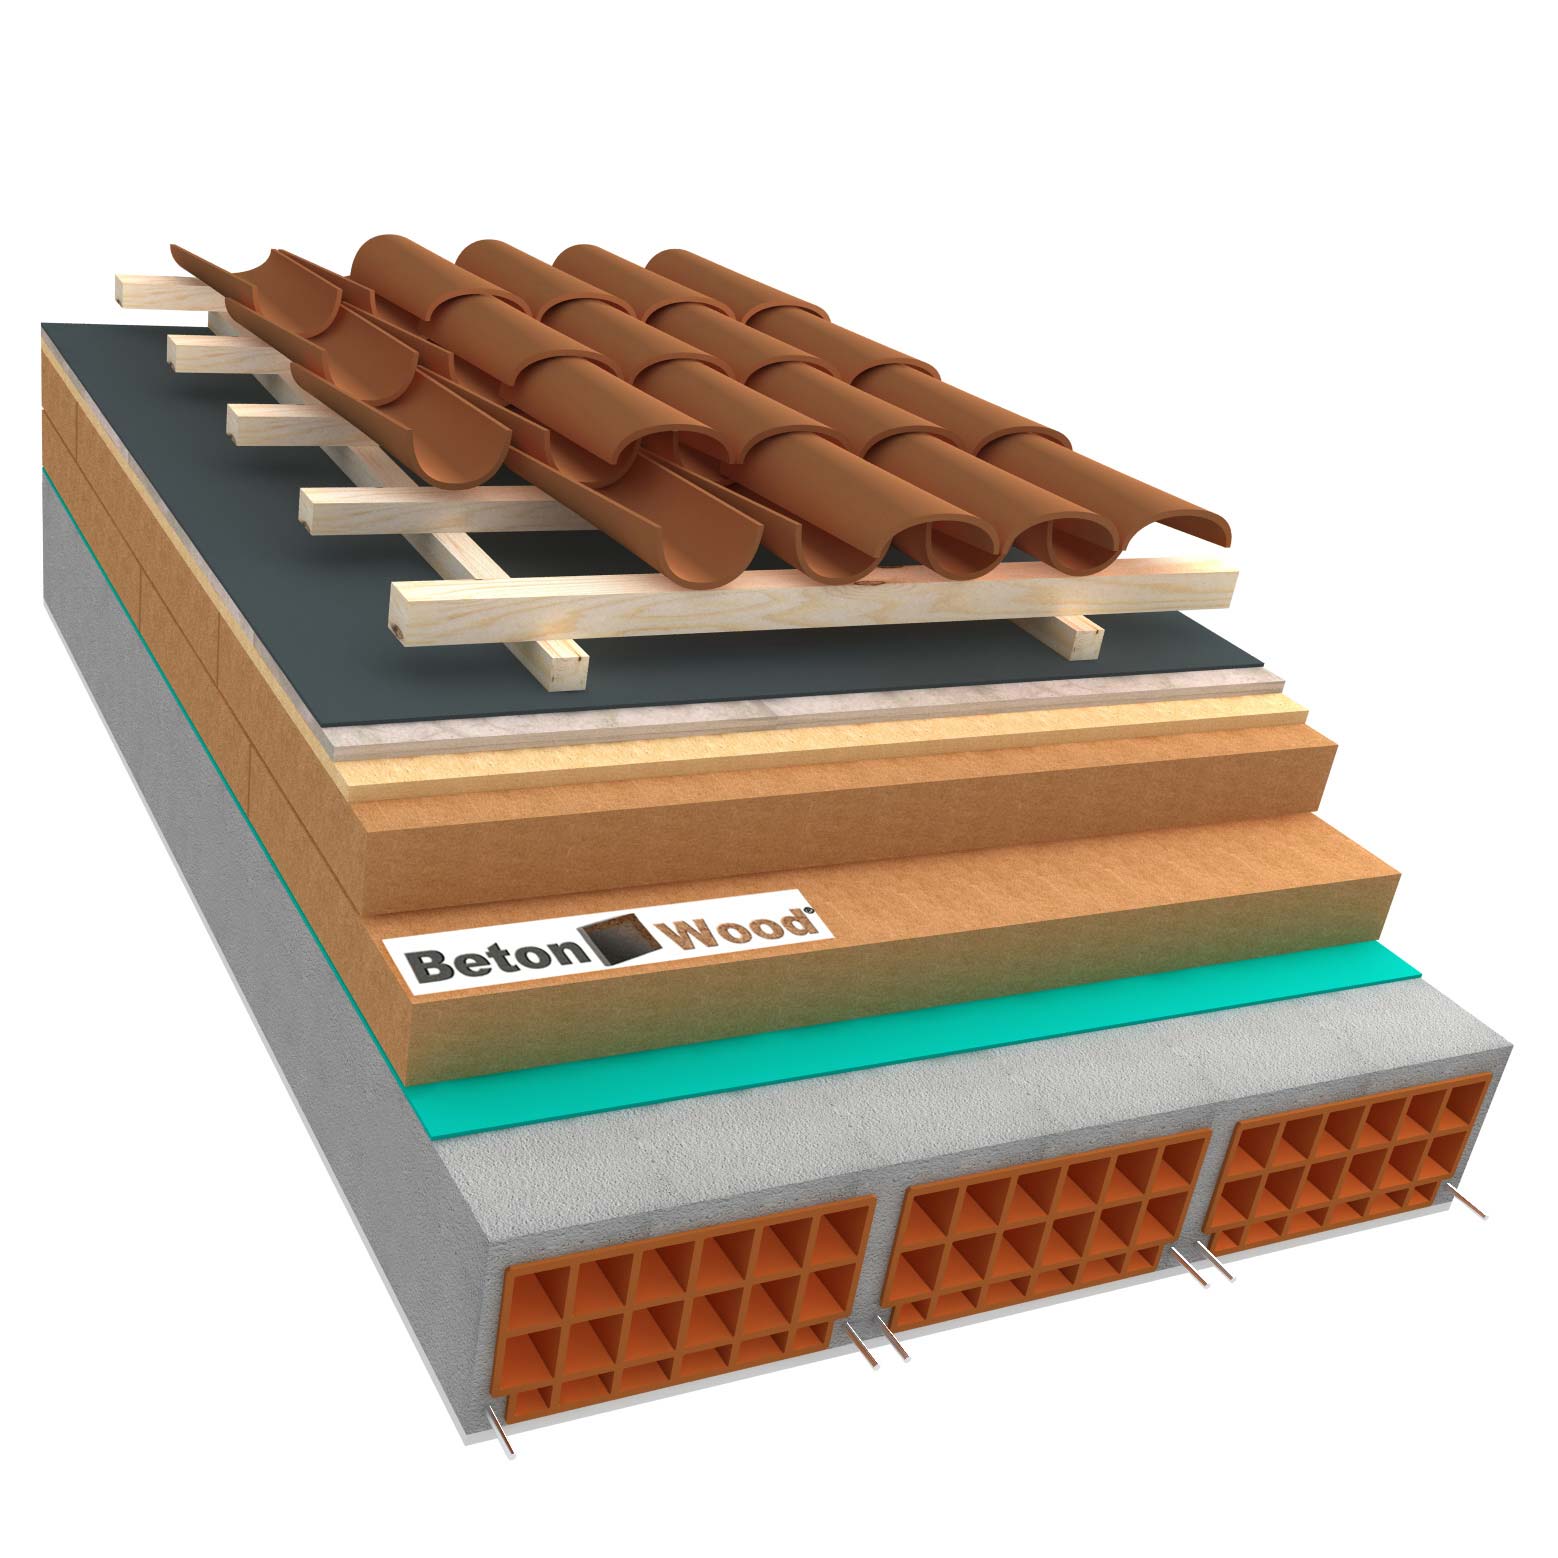 Ventilated roof with fiber wood Isorel, Therm and cement bonded particle boards on concrete